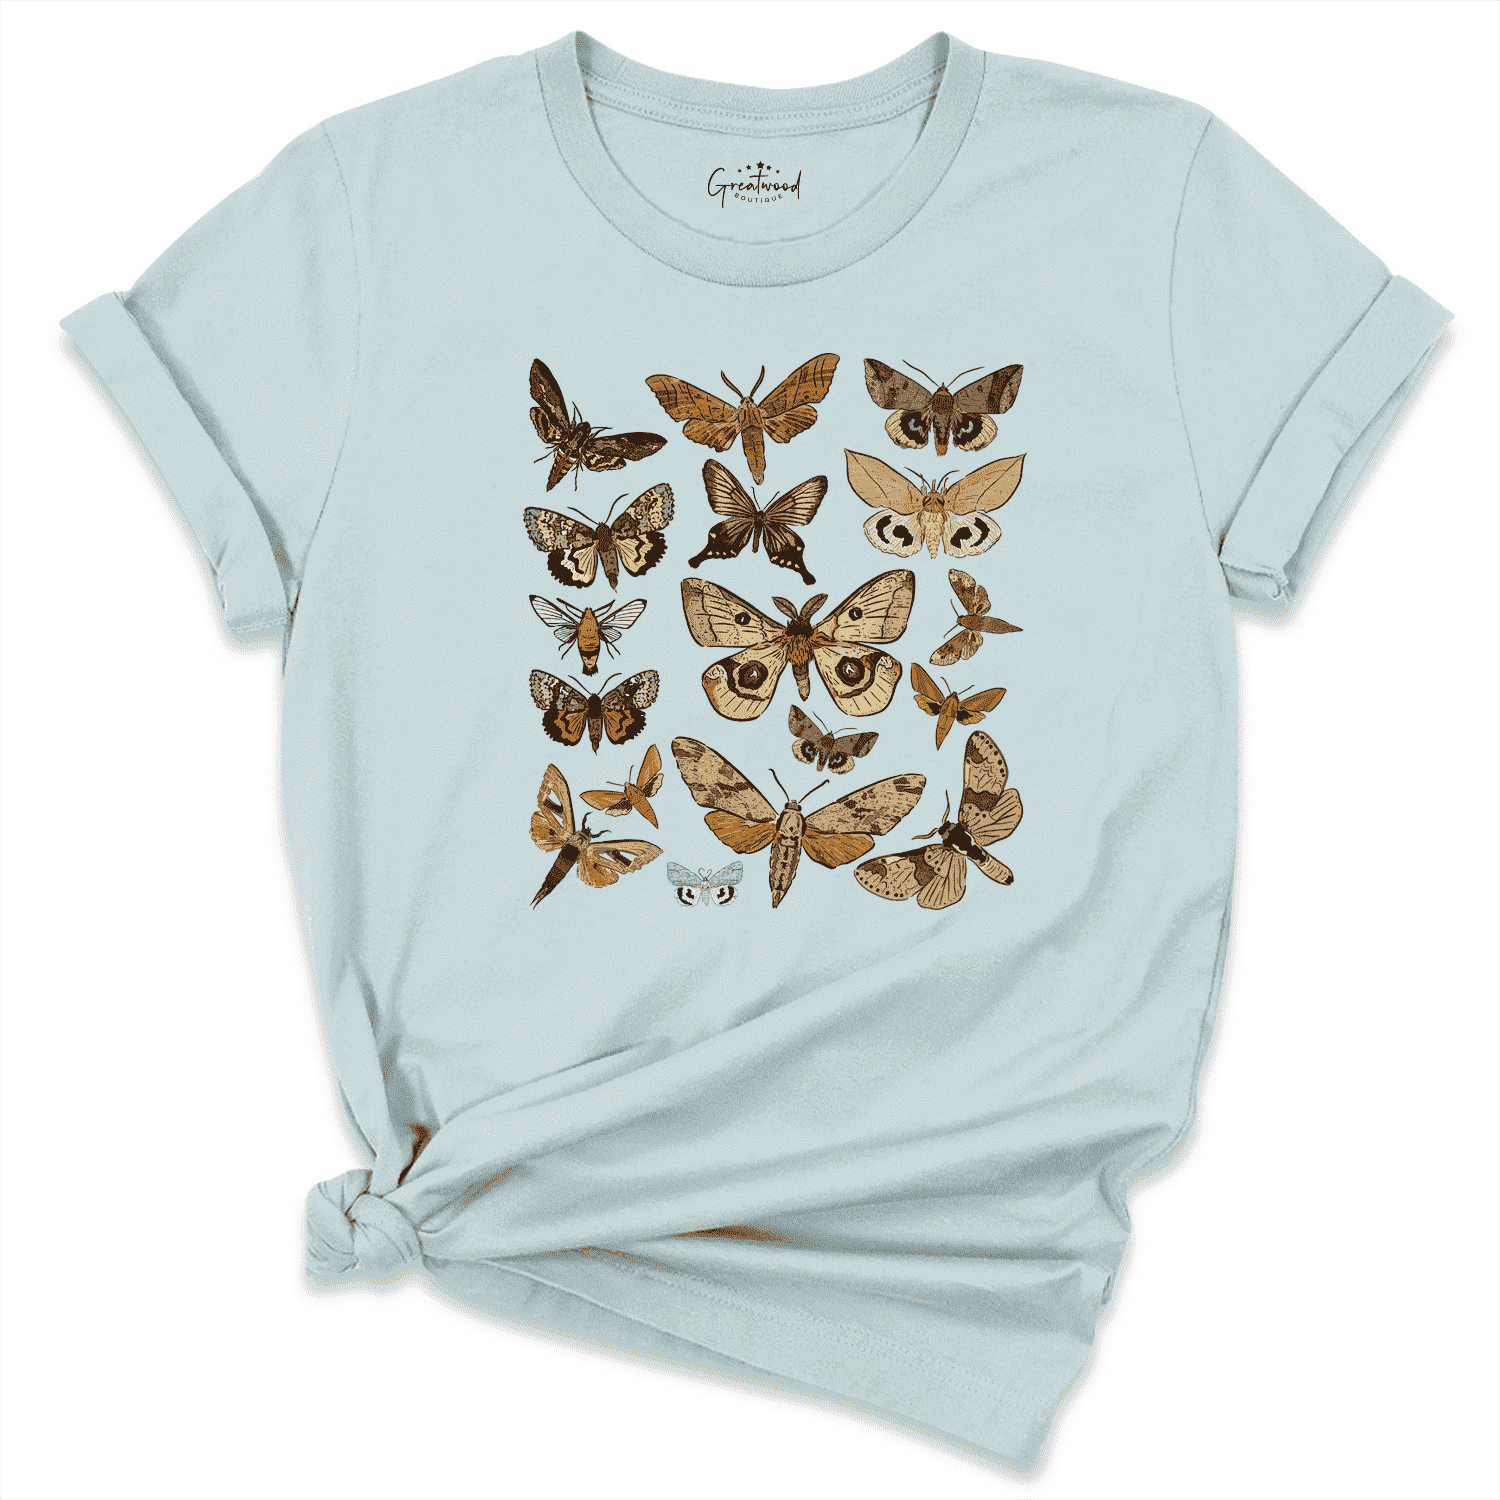 Moth Shirt Blue - Greatwood Boutique